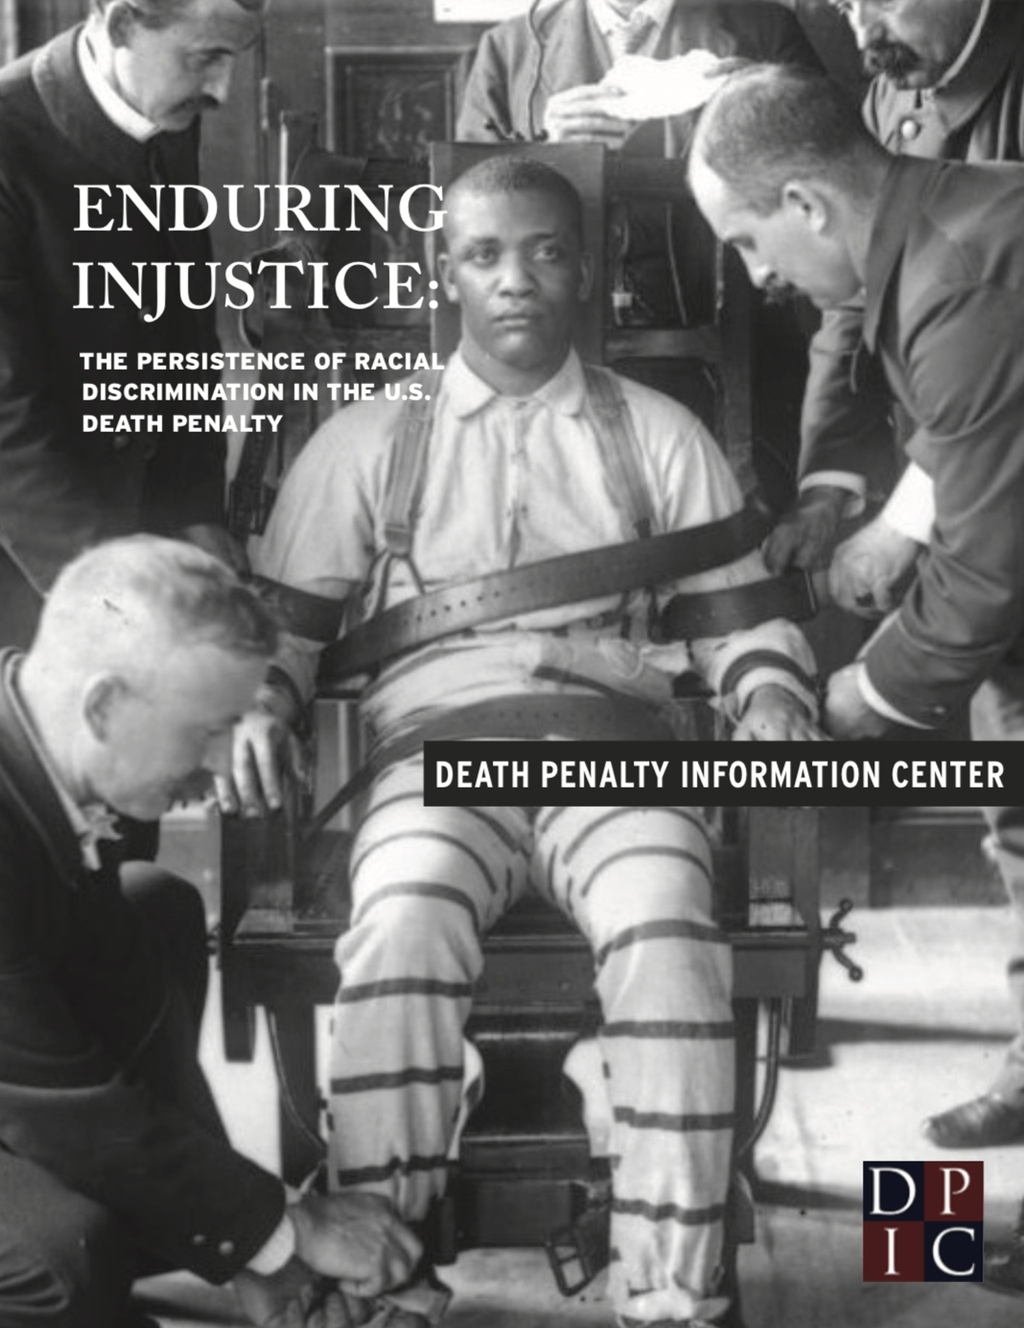 DPIC Commemorates Juneteenth: Our Report, Enduring Injustice, Details the Persistence of Racial Discrimination in the U.S. Death Penalty